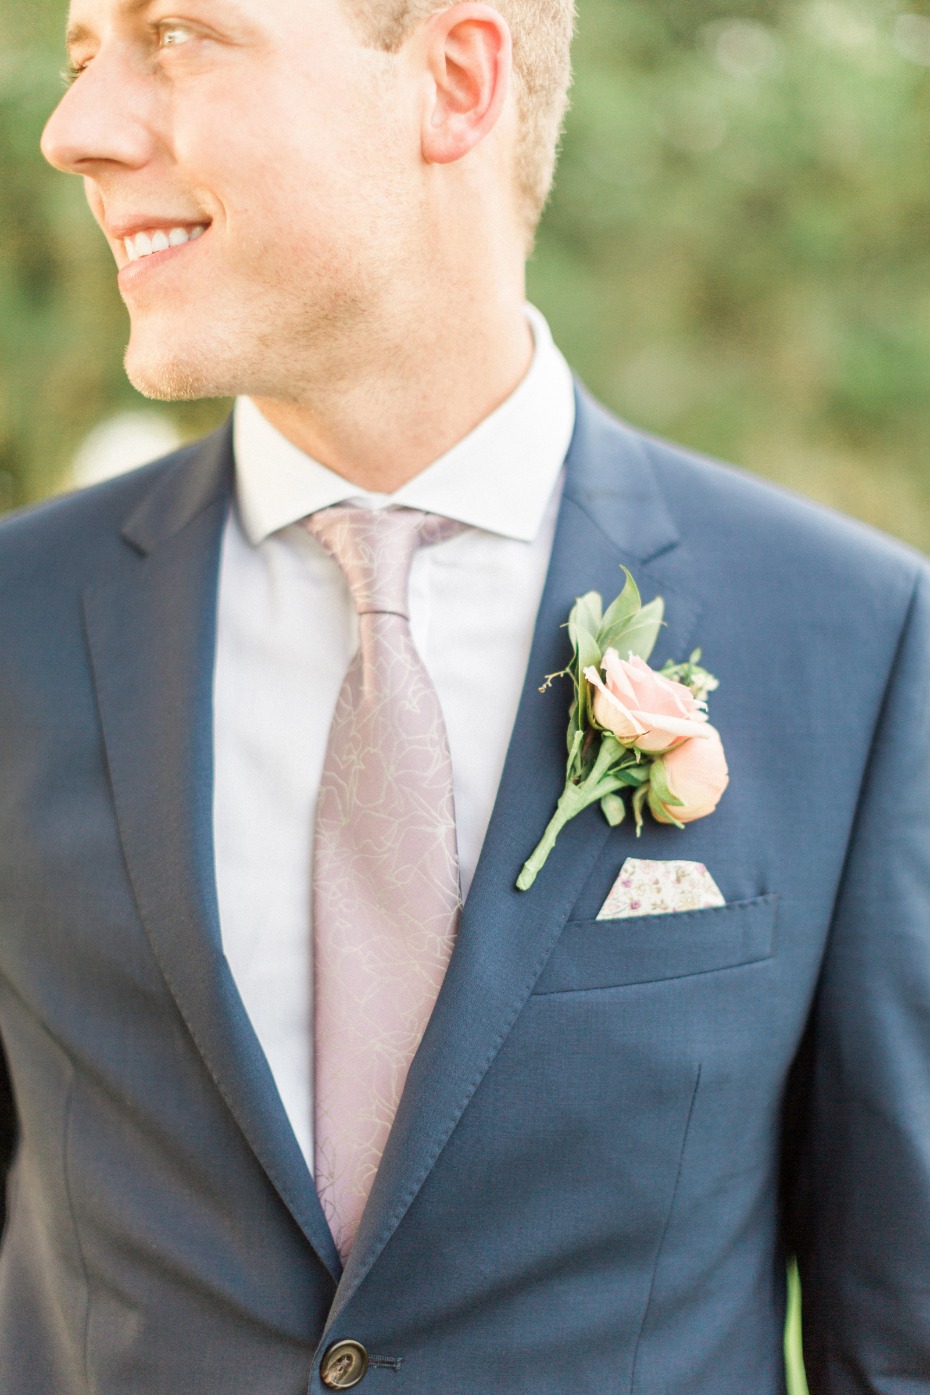 navy wedding suit for the groom